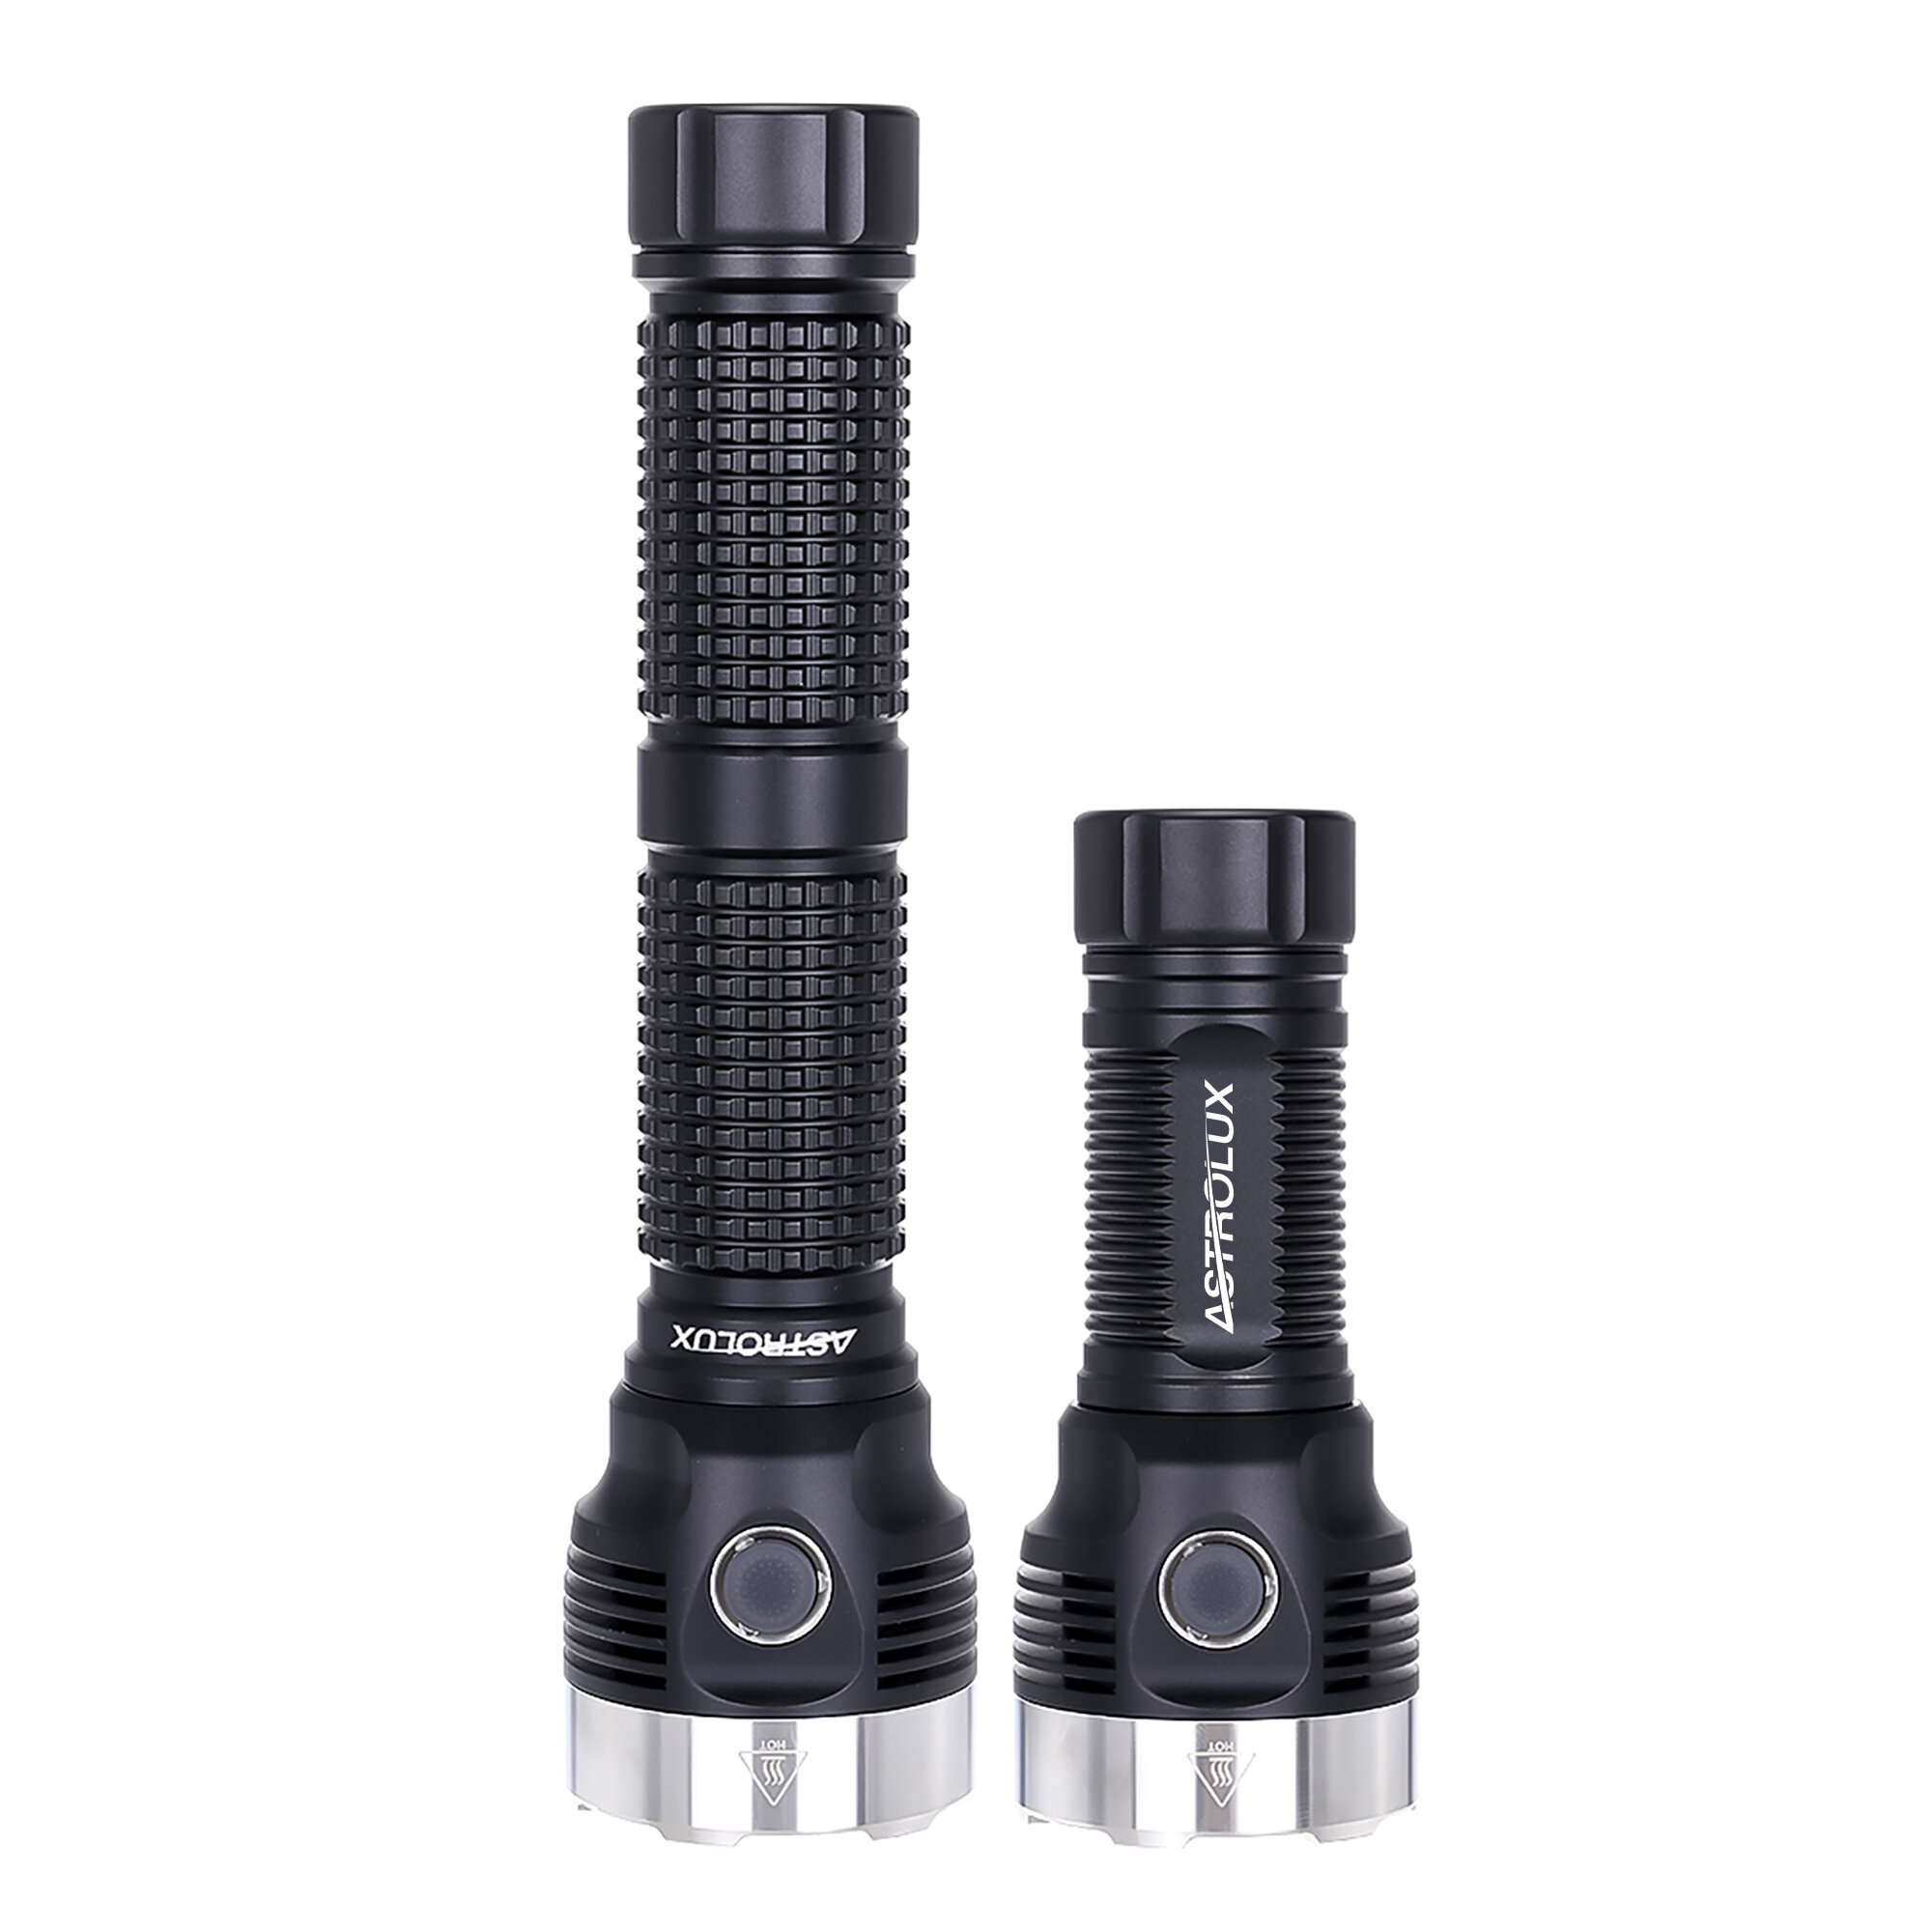 best price,astrolux,ea09,9x,hl2x,10360lm,460m,flashlight,coupon,price,discount